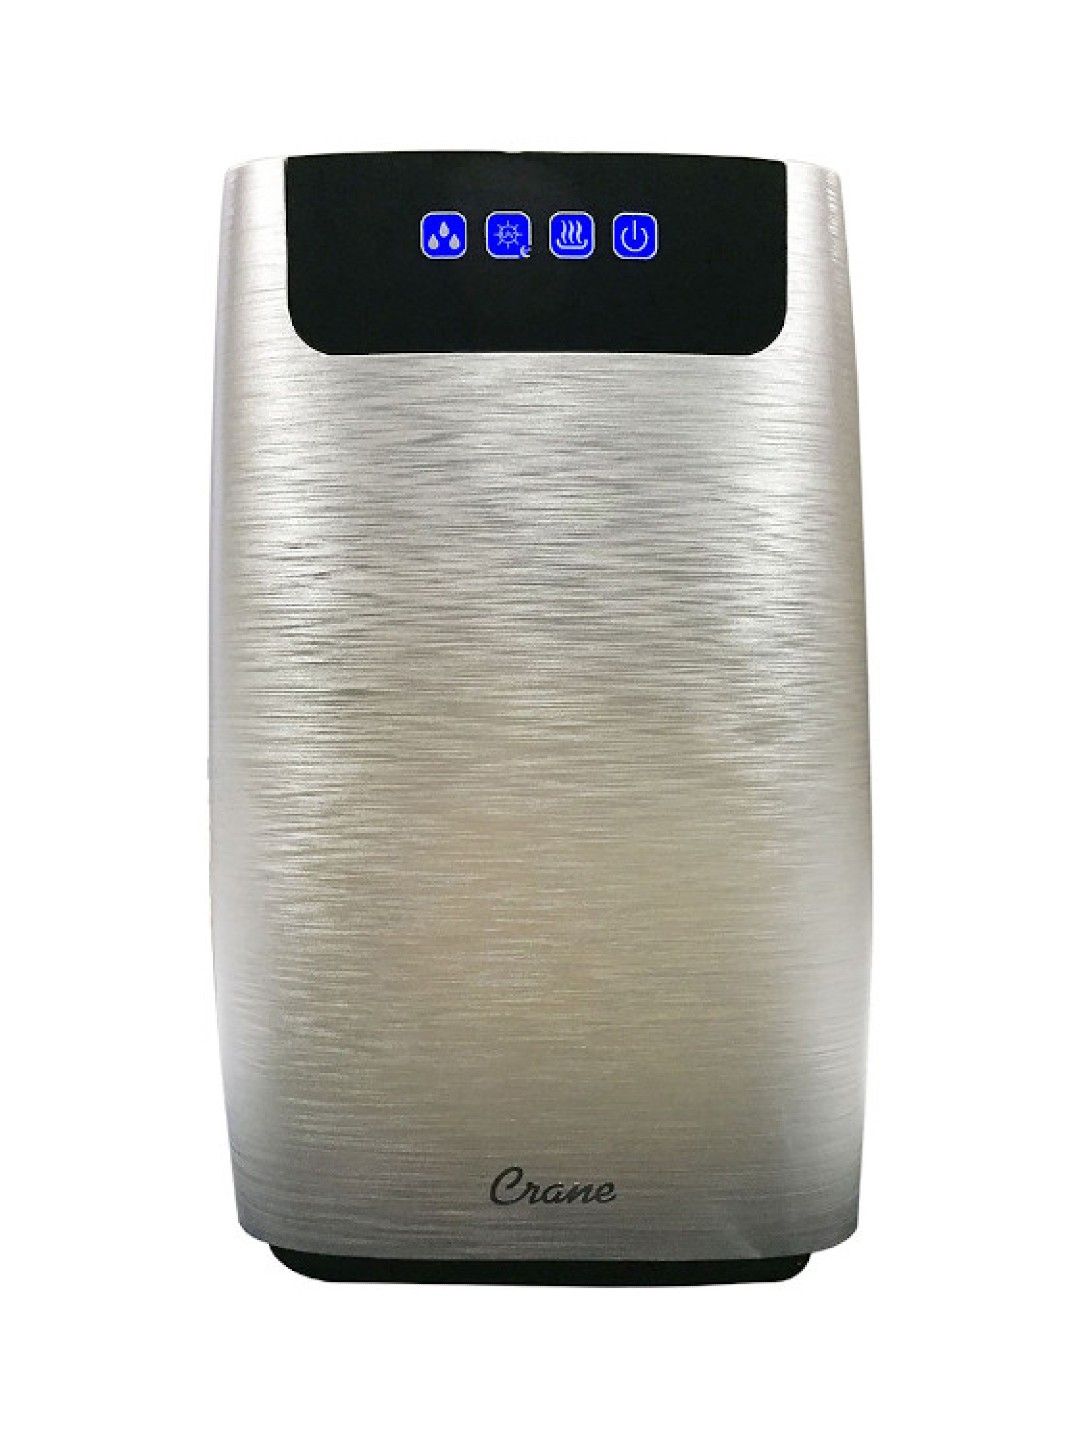 Crane 4 In 1 True Hepa Humidifier (without Remote)